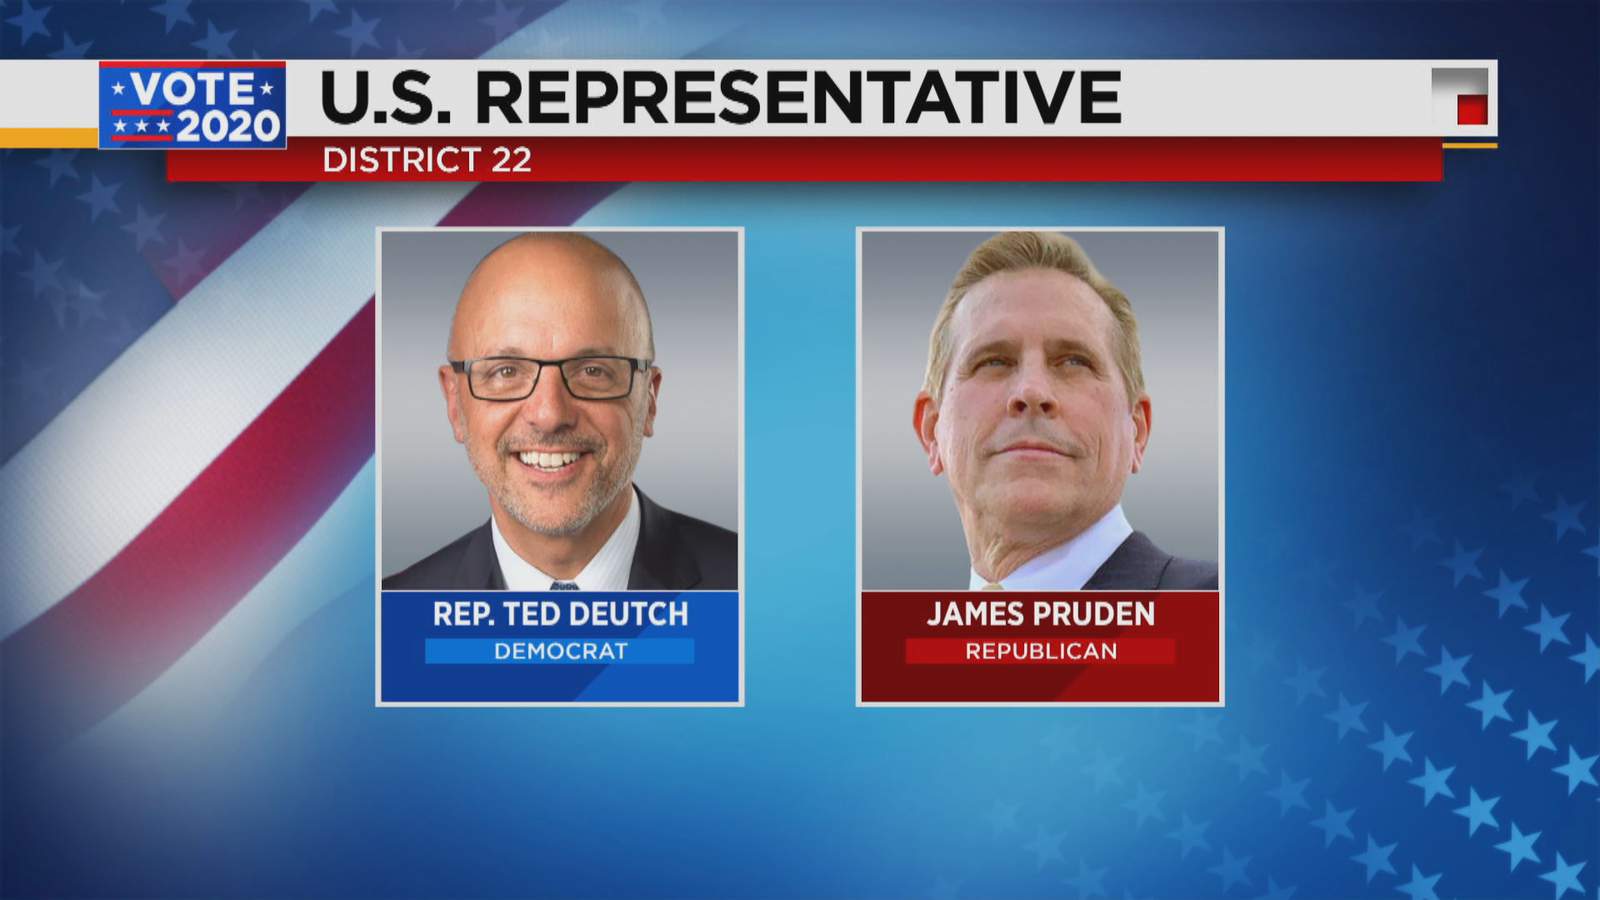 Ted Deutch will continue to represent Florida’s 22nd Congressional District